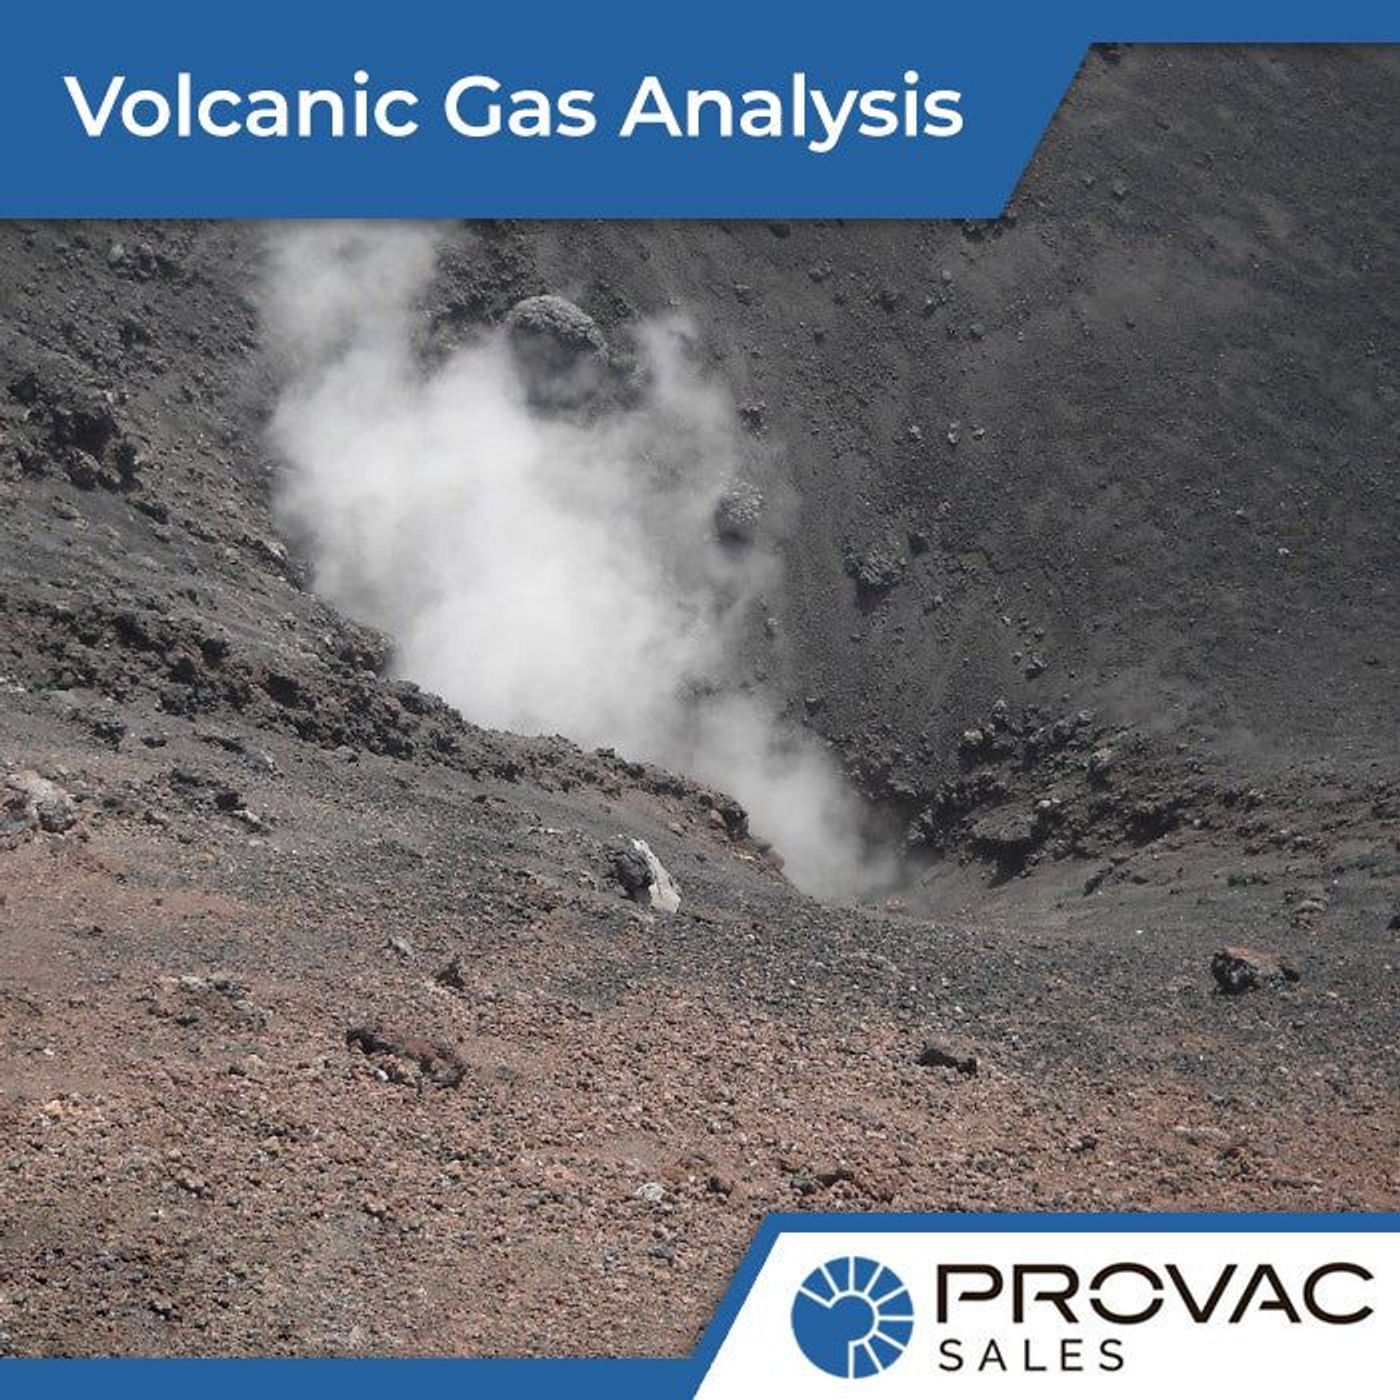 Use of Vacuum Pumps in Volcanic Gas Analysis